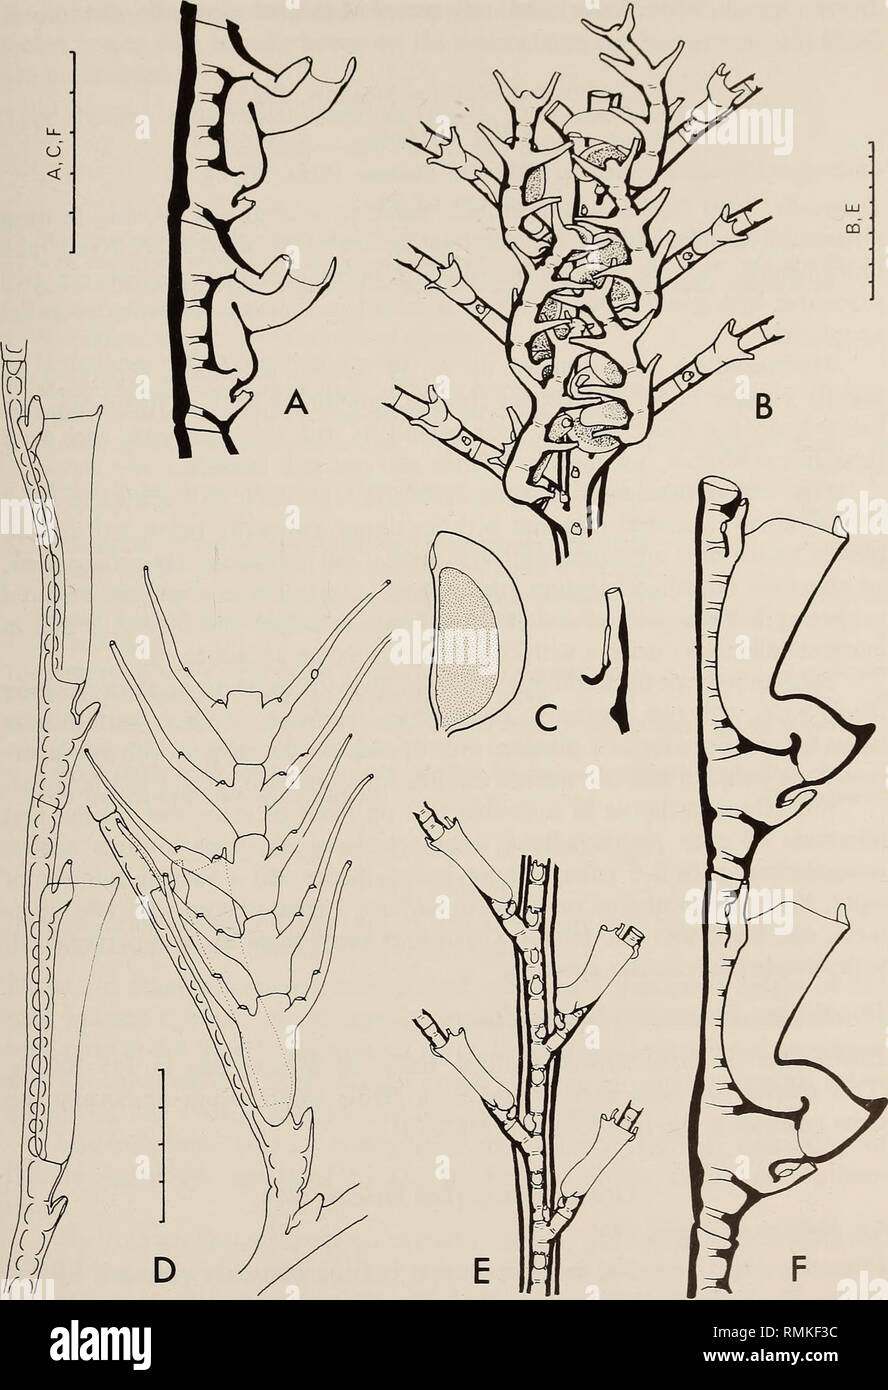 . Annals of the South African Museum = Annale van die Suid-Afrikaanse Museum. Natural history. MONOGRAPH ON THE HYDROIDA OF SOUTHERN AFRICA 431. Fig. 133. Cladocarpus valdiviae. A, hydrocladium; B, anterior view of stem showing phylactocarps; C, male gonotheca and nematotheca from phylactocarp. Cladocarpus tenuis, redrawn from Vervoort (19666). D, hydrocladium and phylactocarp. Cladocarpus unicornus sp. nov., from holotype. E, anterior view of stem showing origins of hydrocladia; F, hydrocladium. Scale in mm/10.. Please note that these images are extracted from scanned page images that may hav Stock Photo